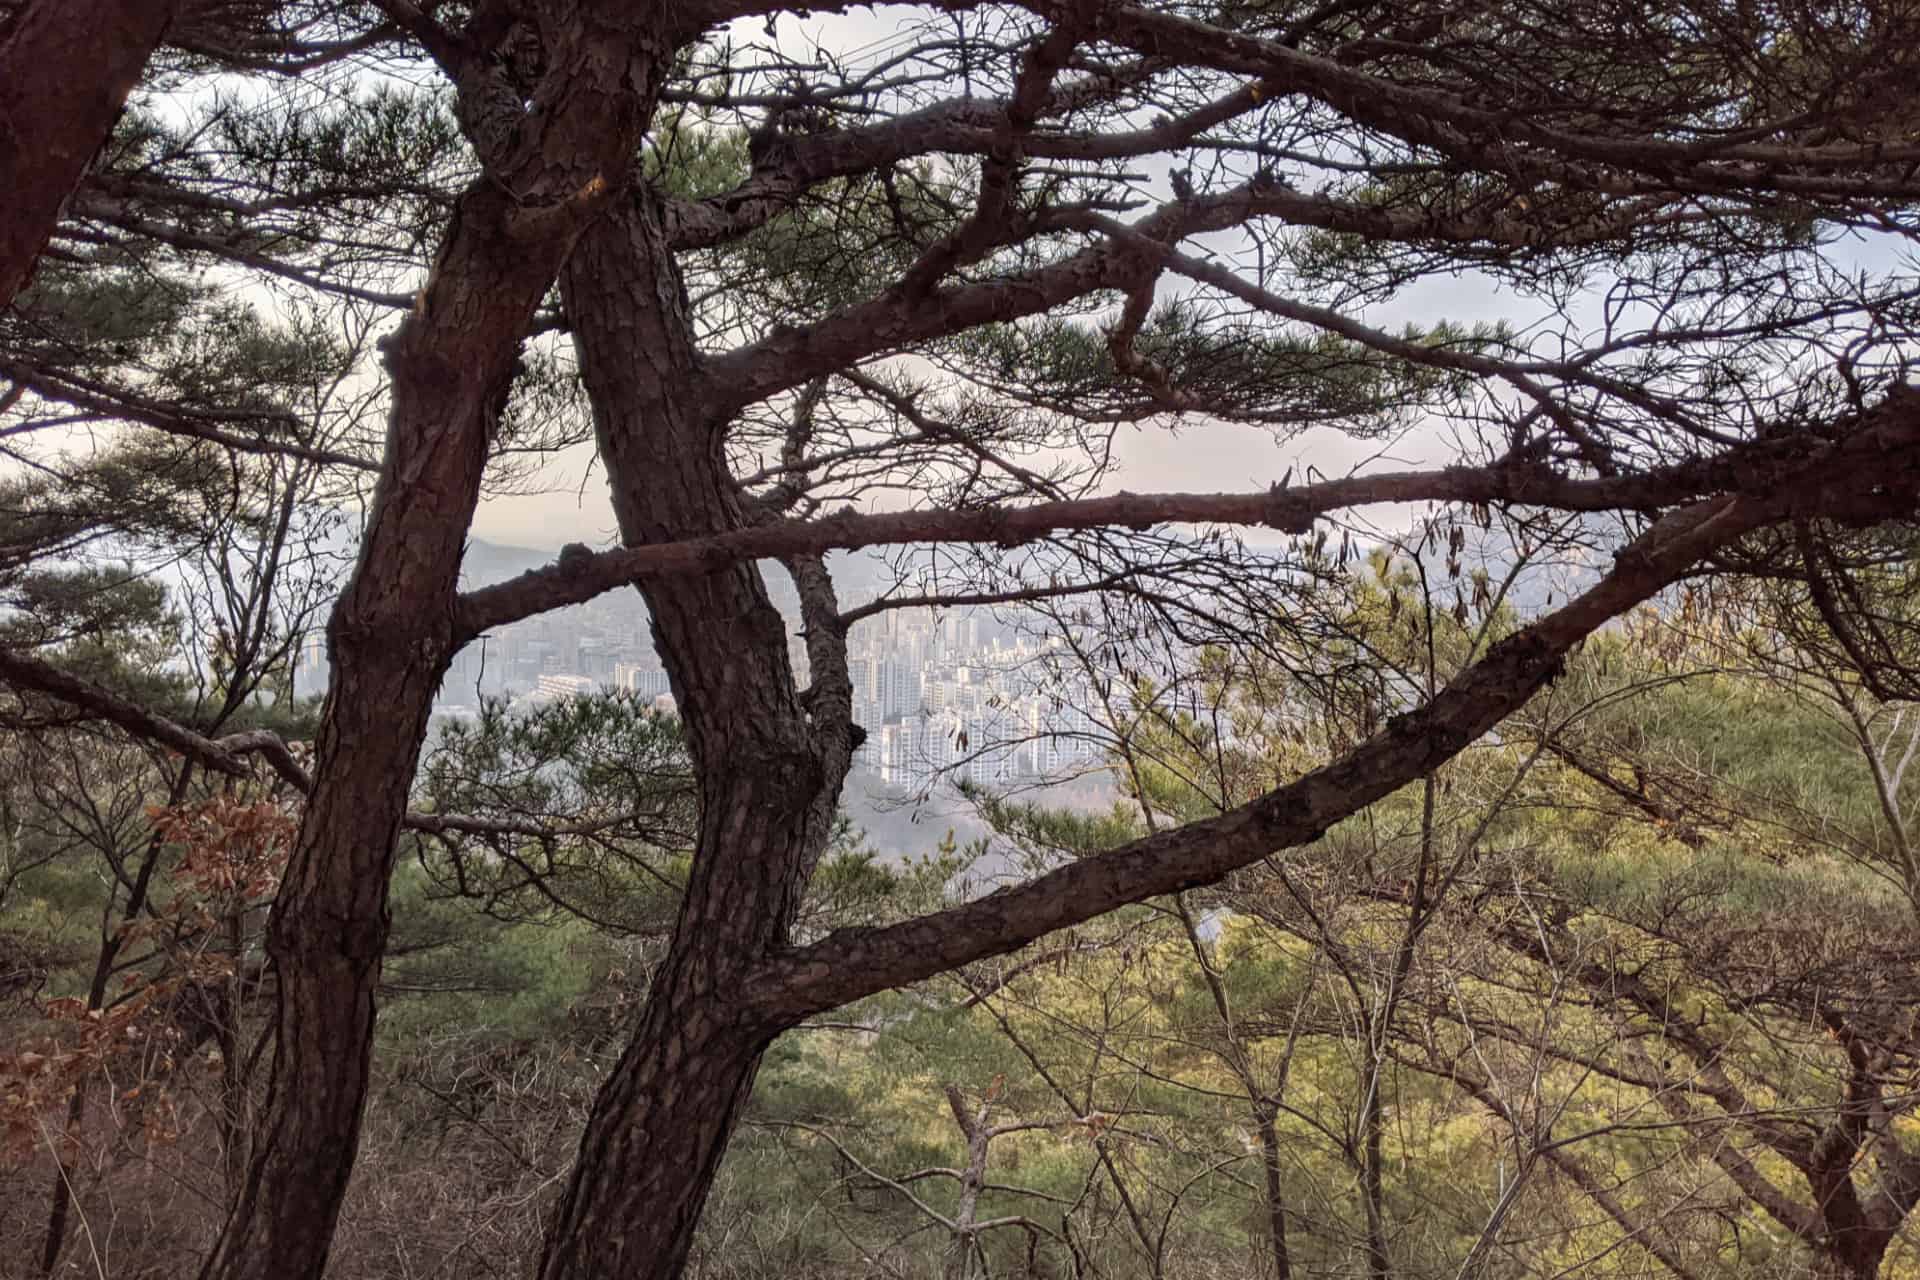 The distant city of Seoul peeking through the trees, high up from the Bukhansan National Park.